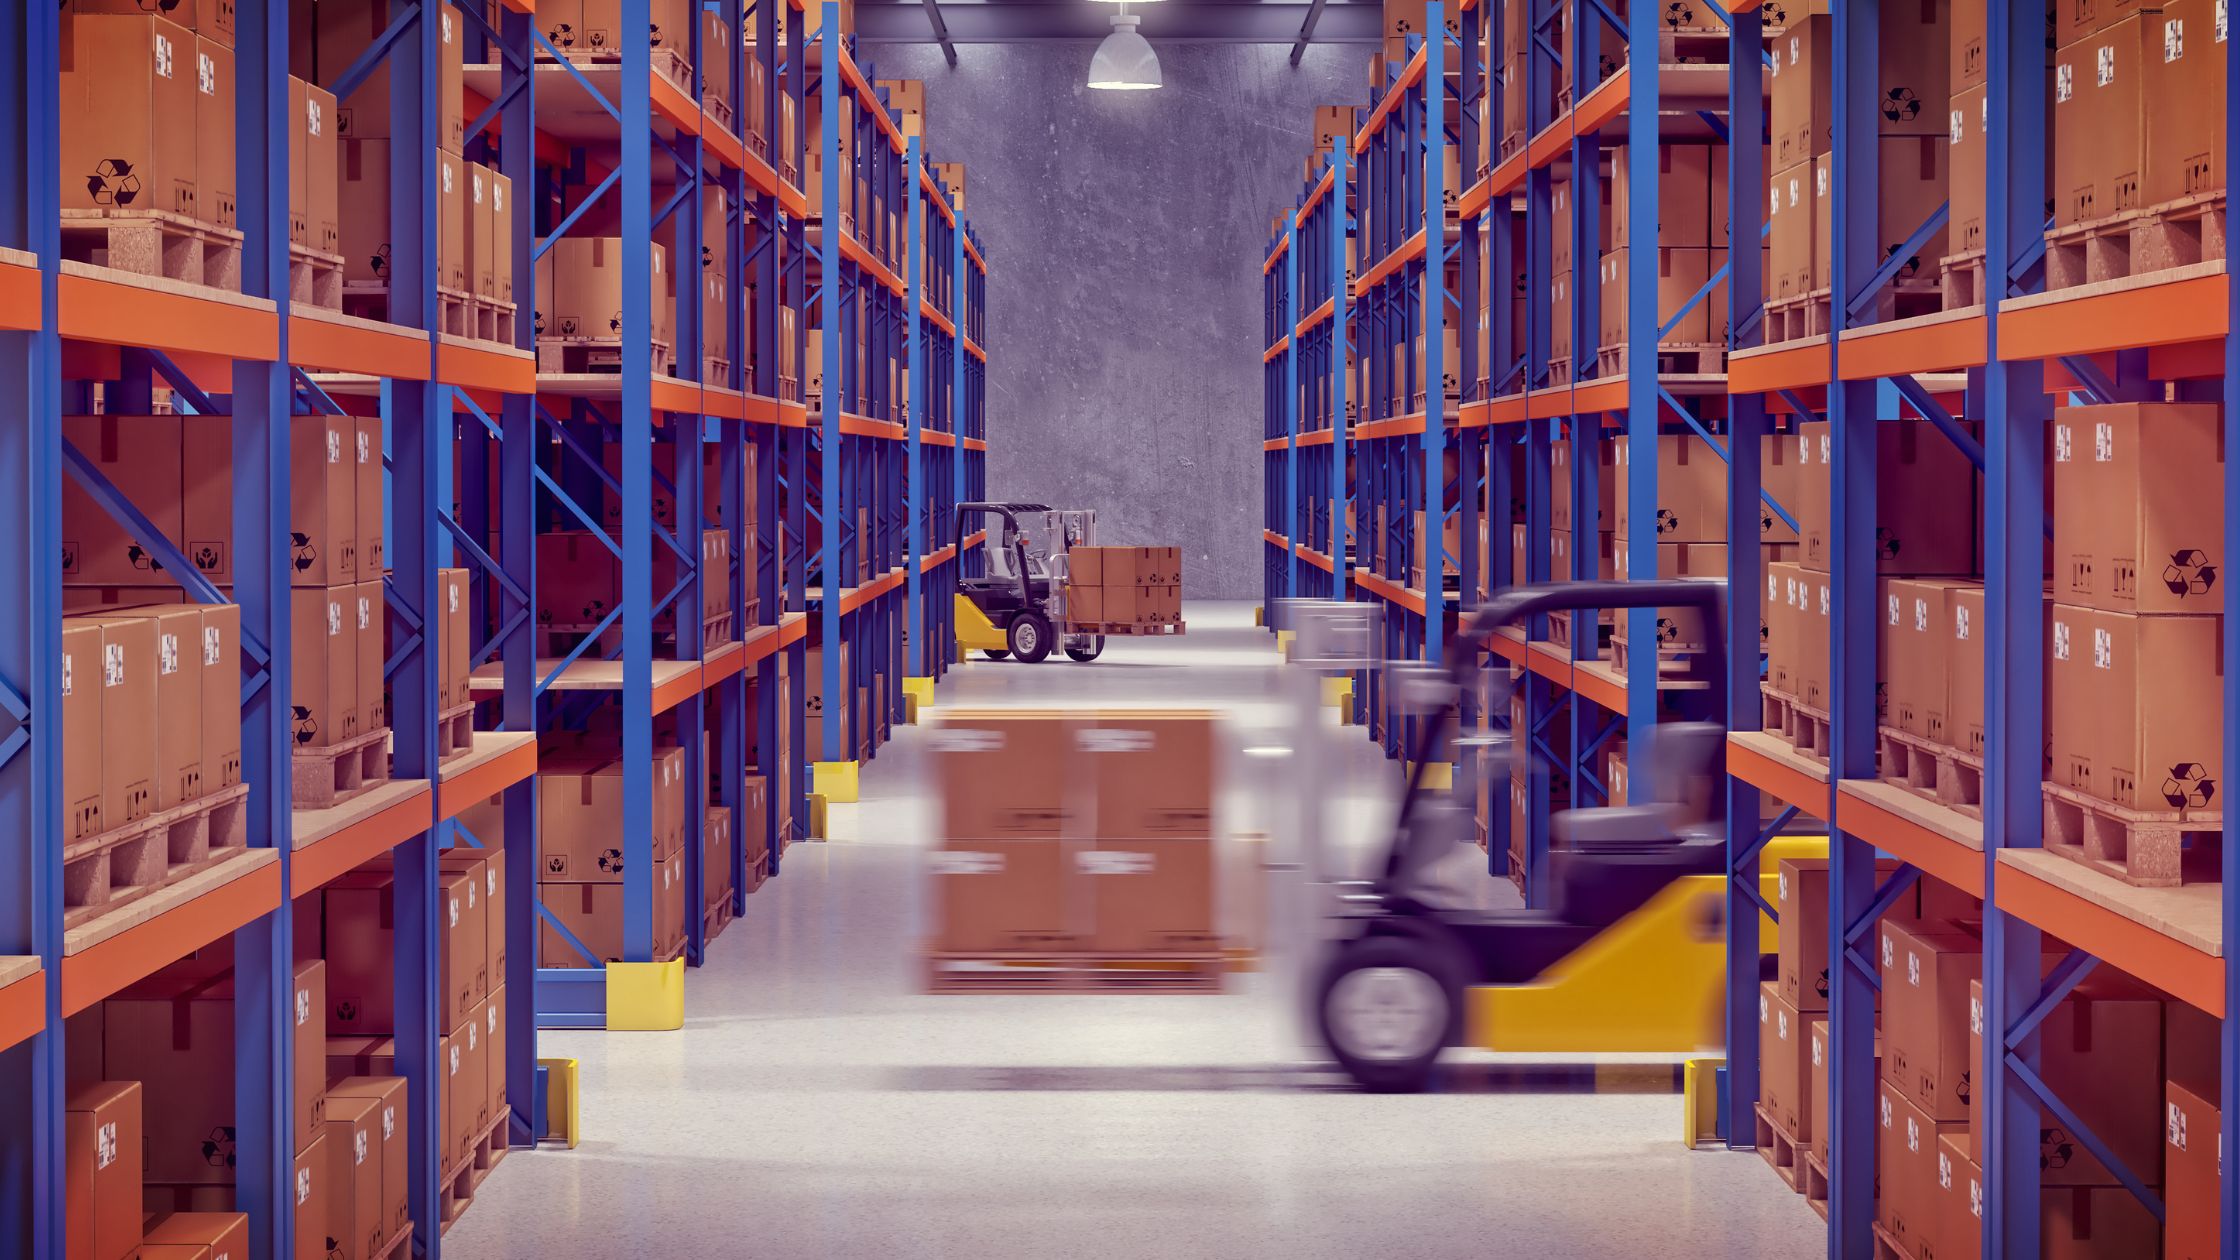 Warehouse with Forklifts